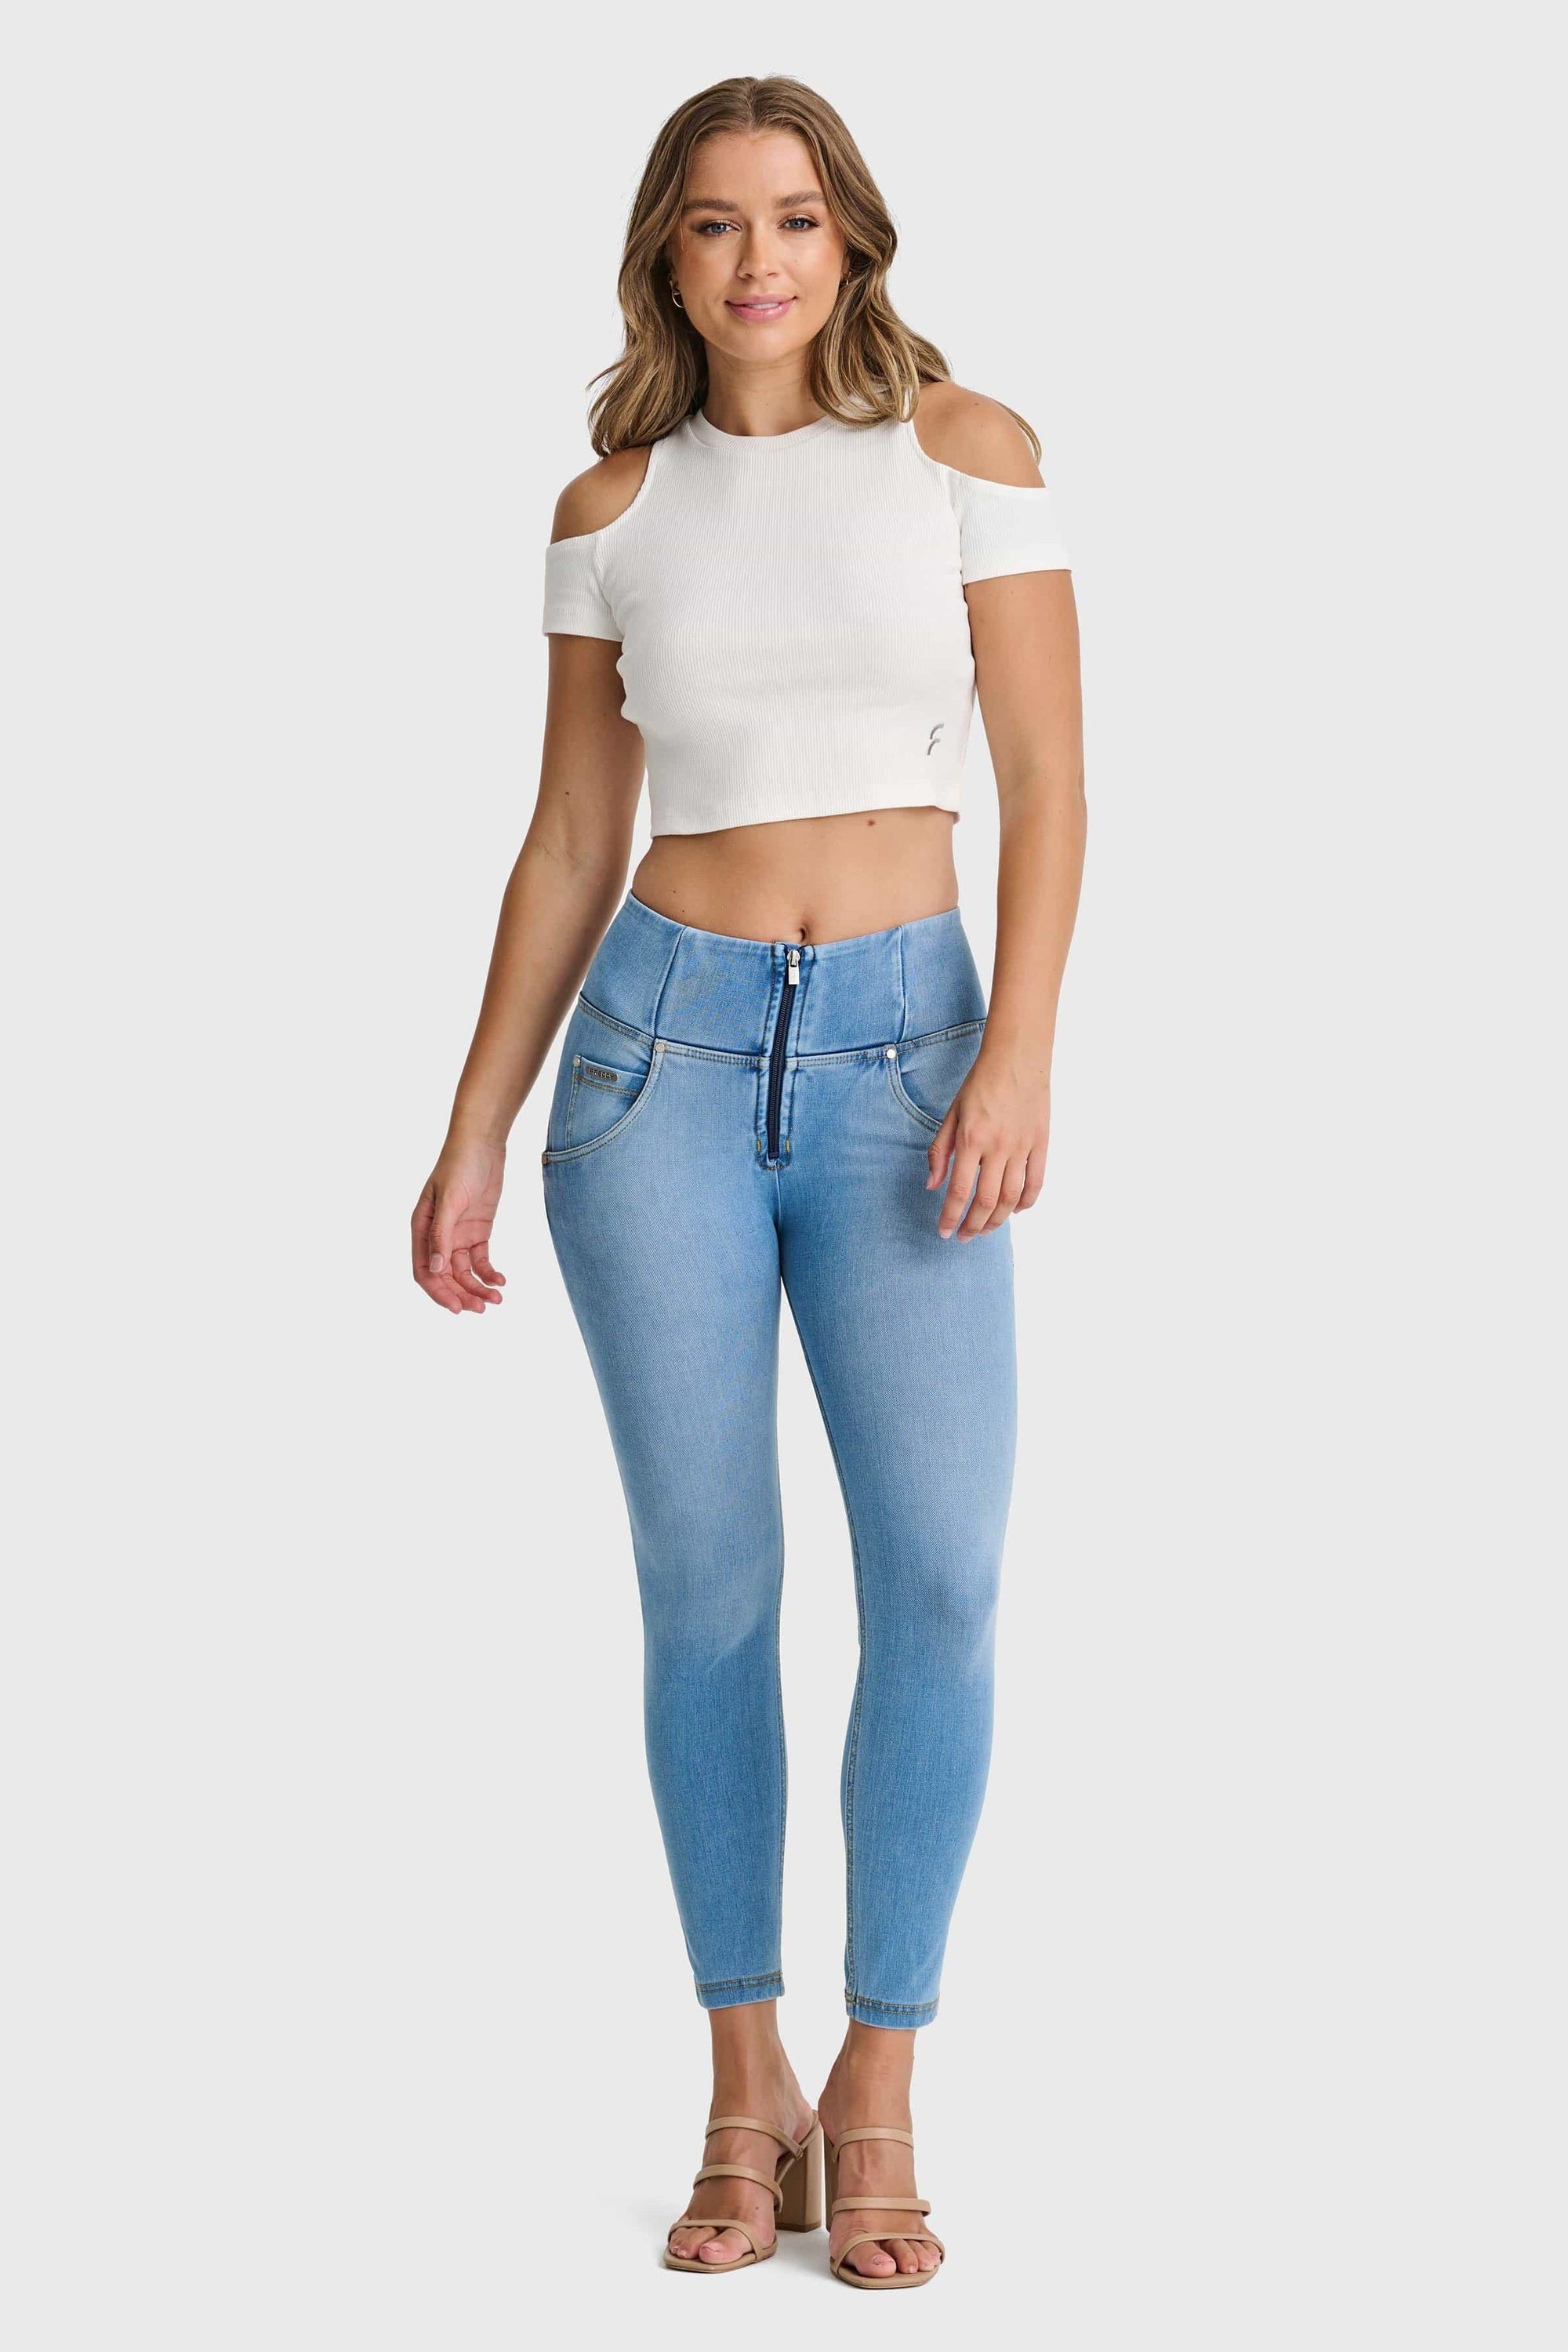 WR.UP® Snug Jeans - High Waisted - 7/8 Length - Light Blue + Yellow Stitching 5